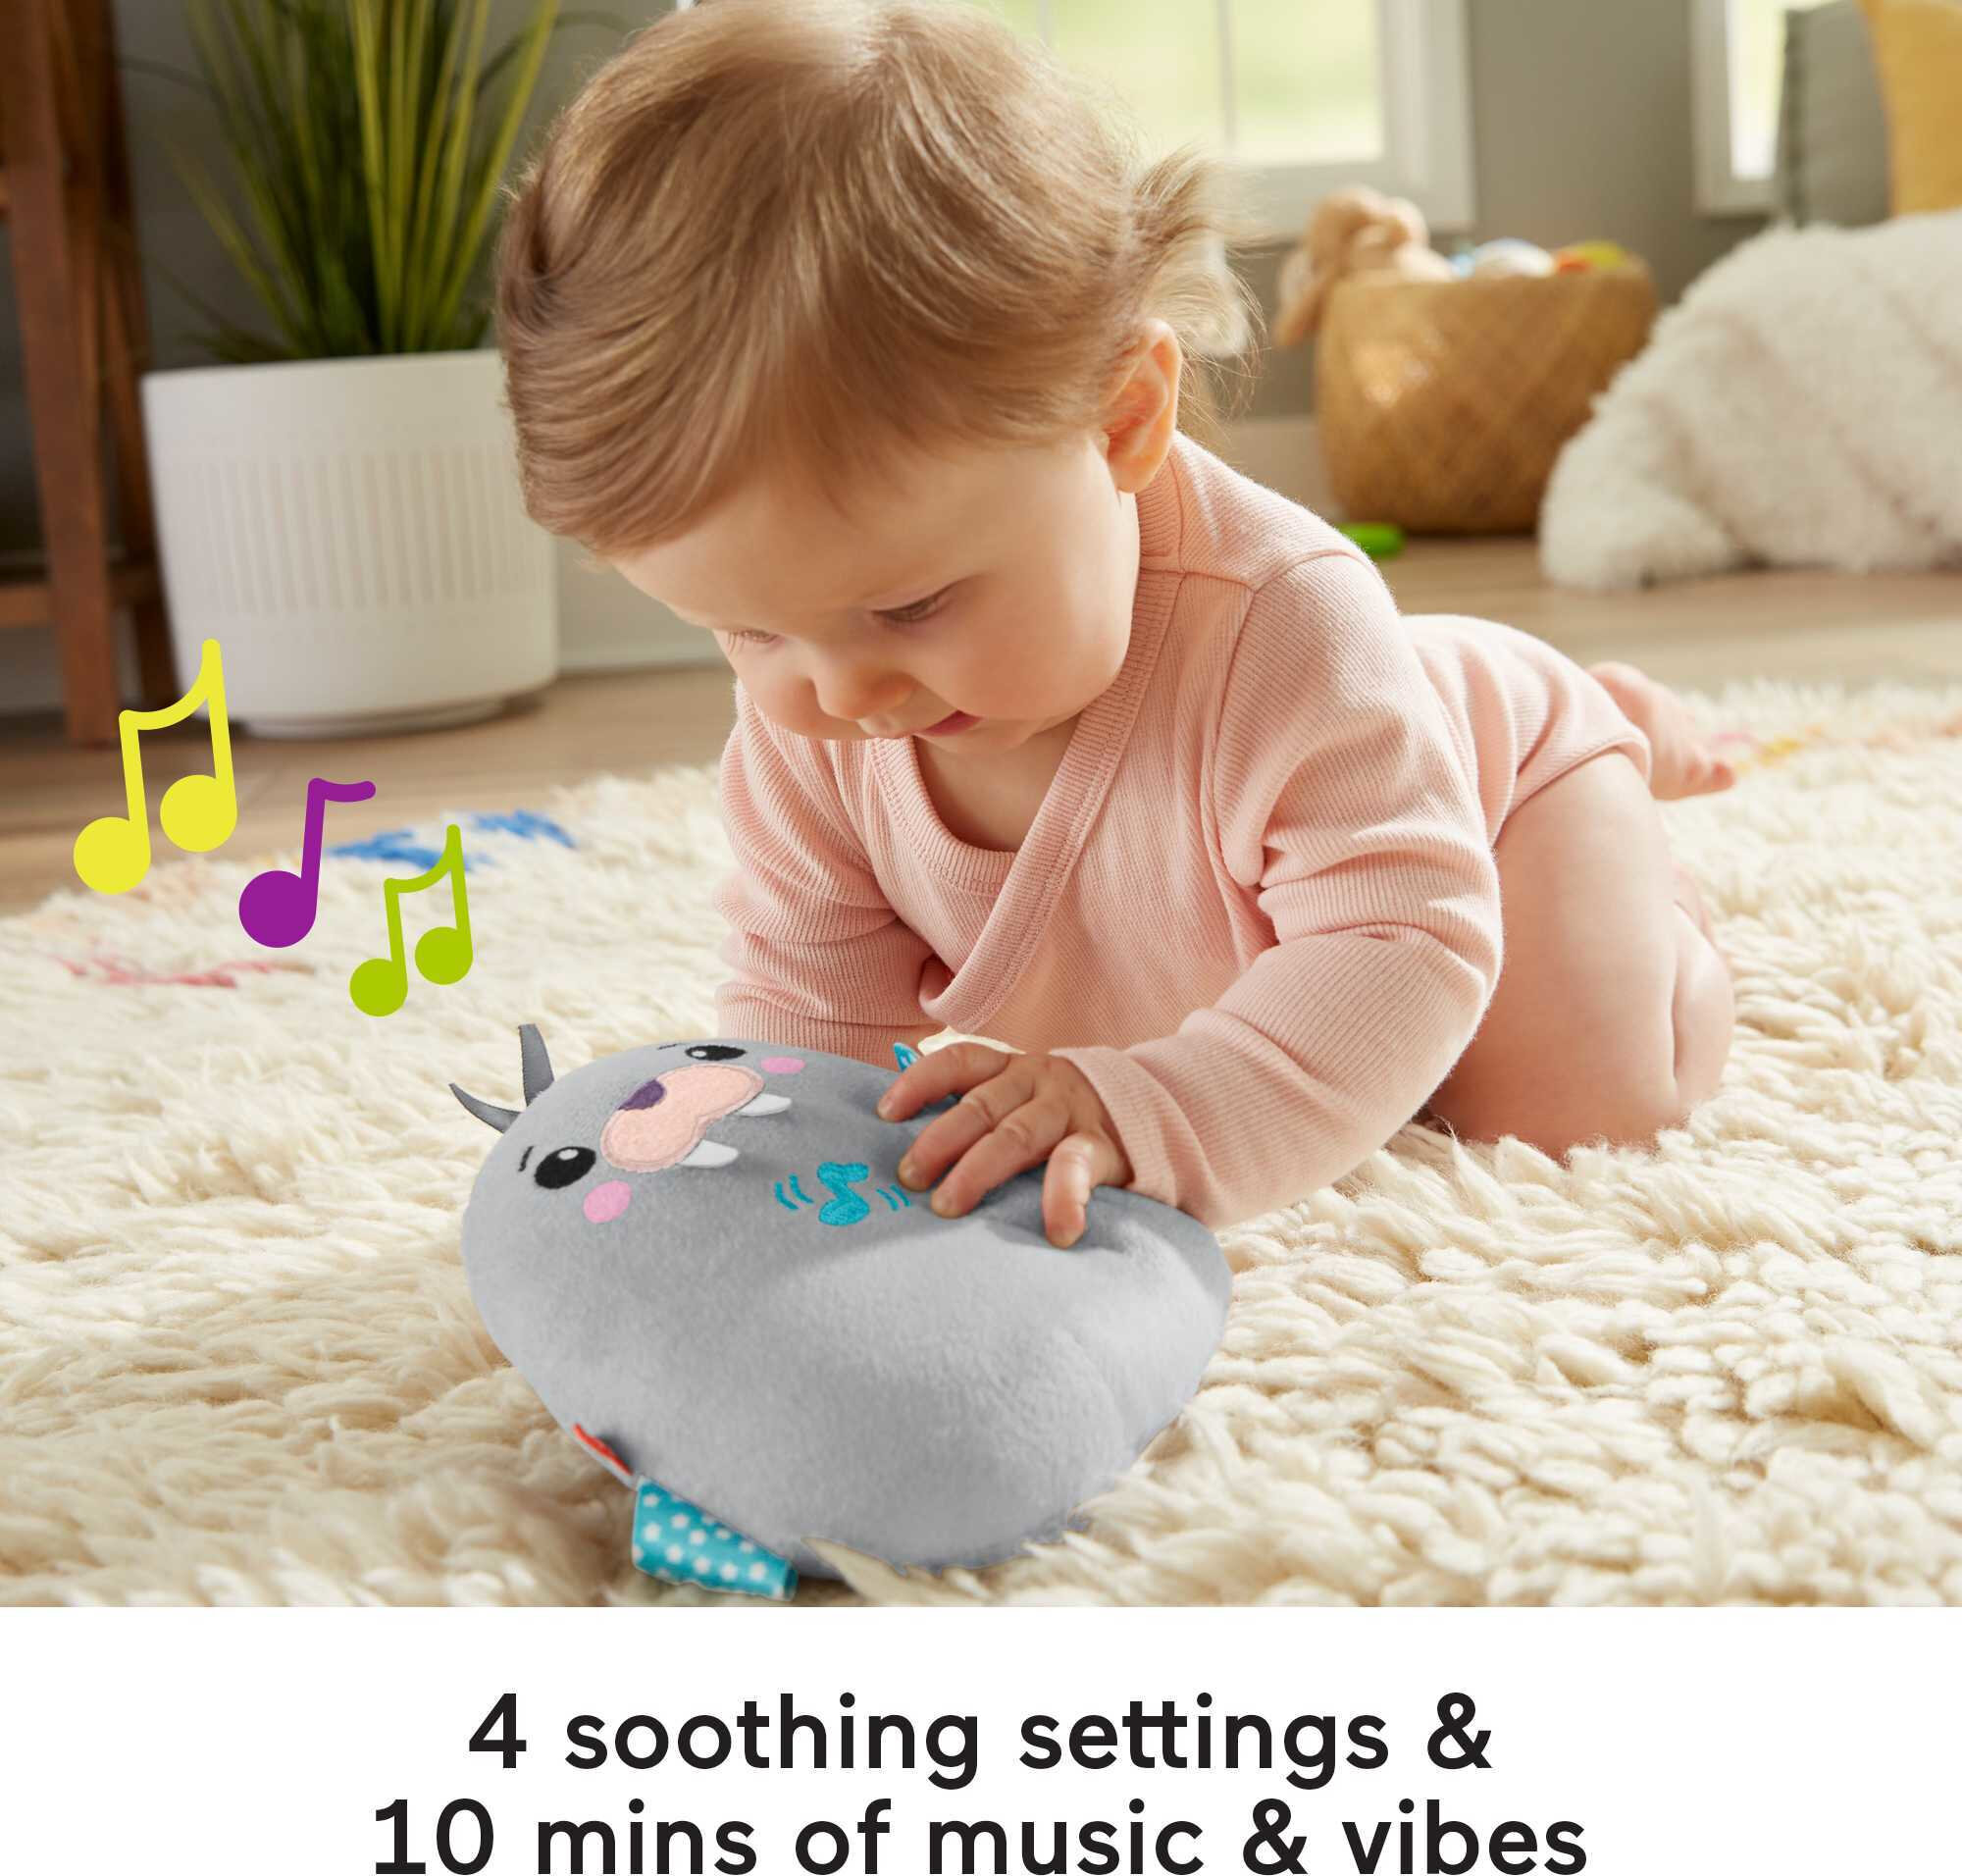 Fisher-Price Chill Vibes Walrus Soother Newborn Sound Machine Plush Baby Toy with Music - image 4 of 8